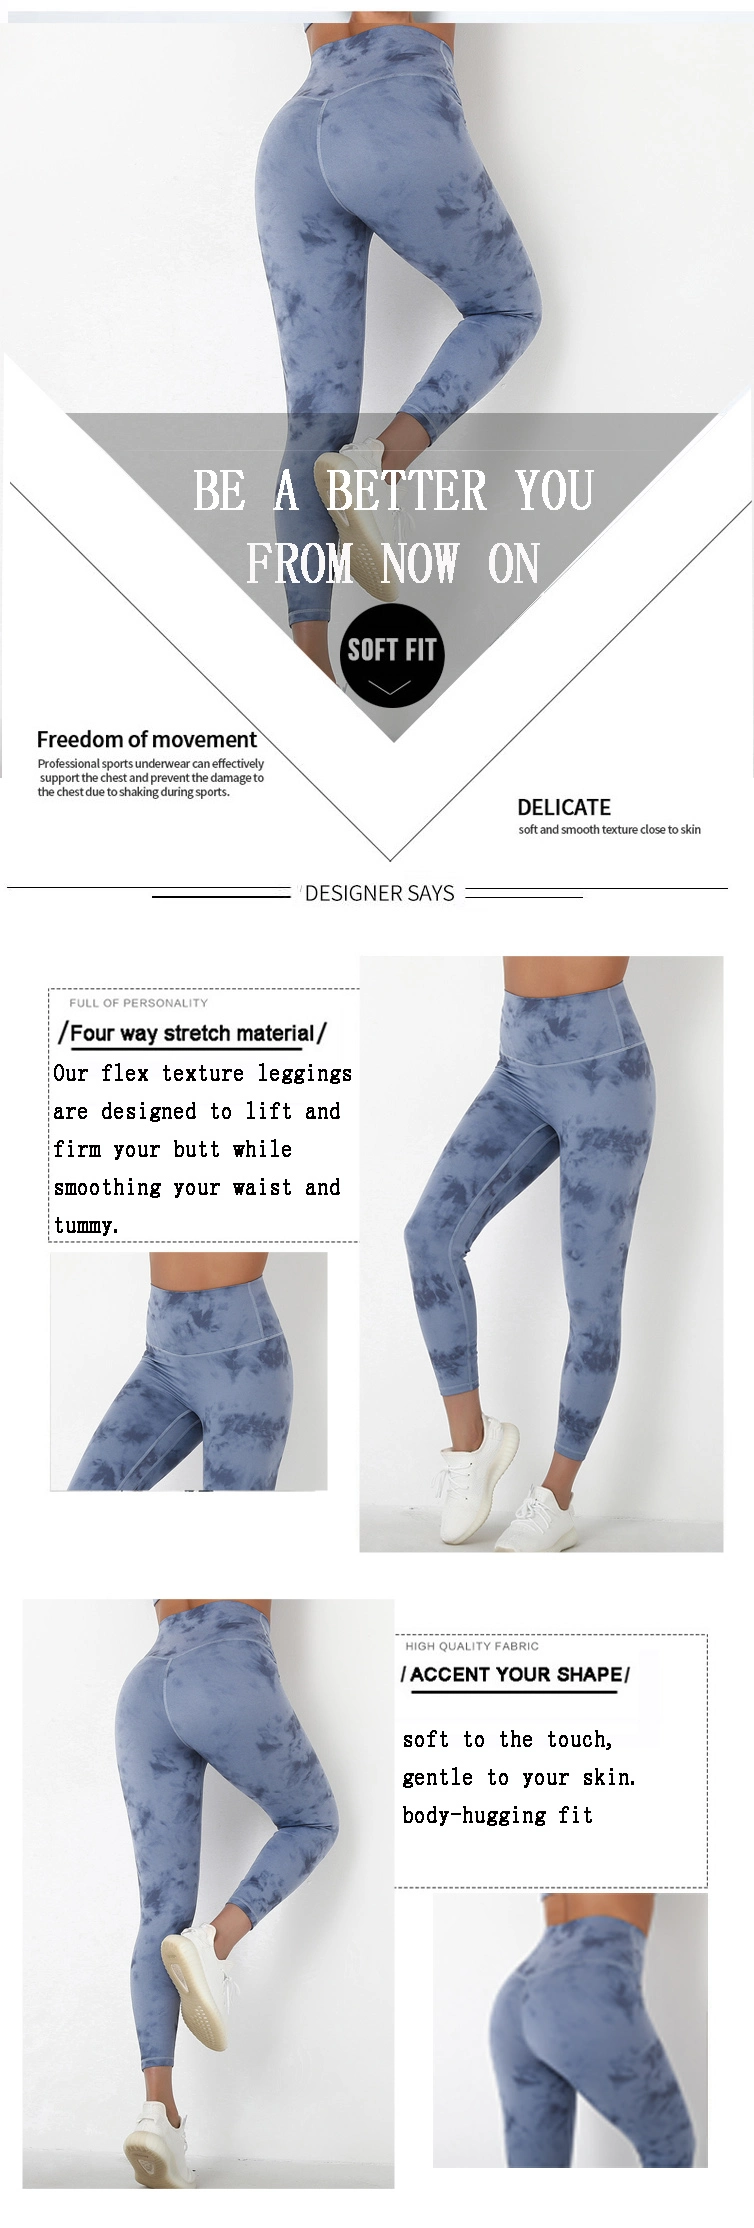 China Wholesale Sports Wear Fitness Clothing High Waisted Workout Tie Dye Tights Woman Yoga Pants Leggings